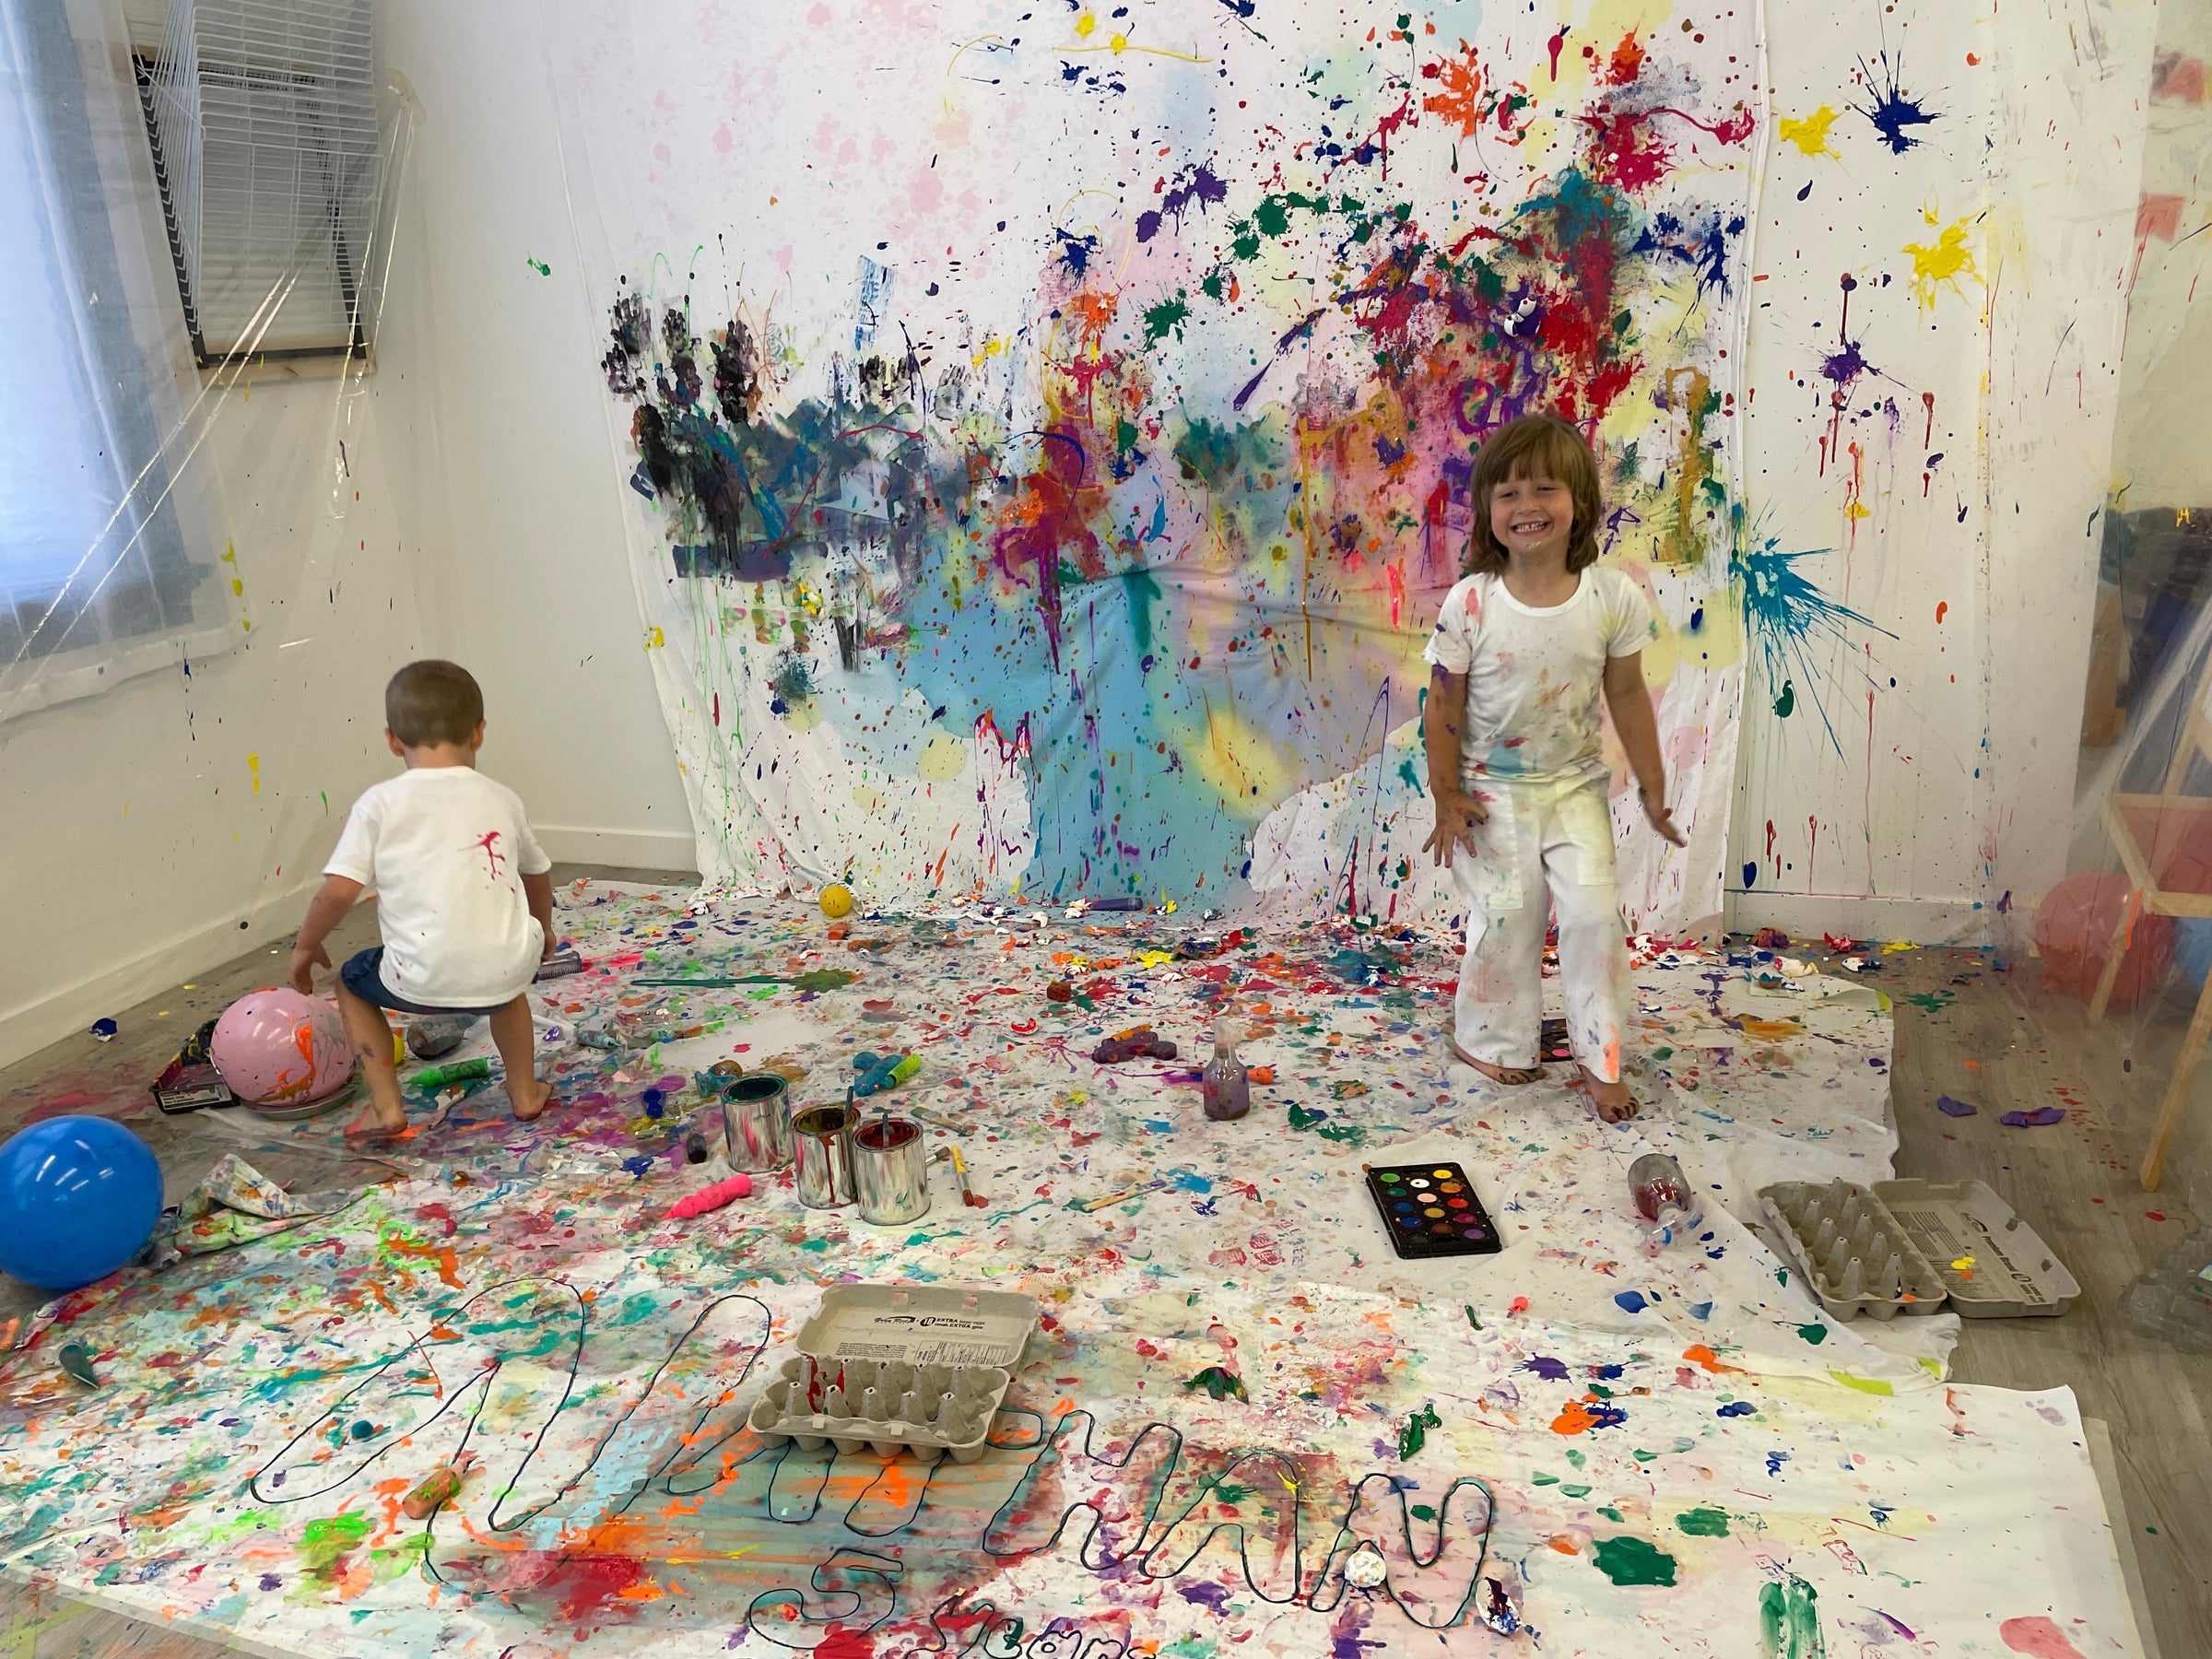 Get Kids Painting: Host a Fun, Messy Toddler Paint Party